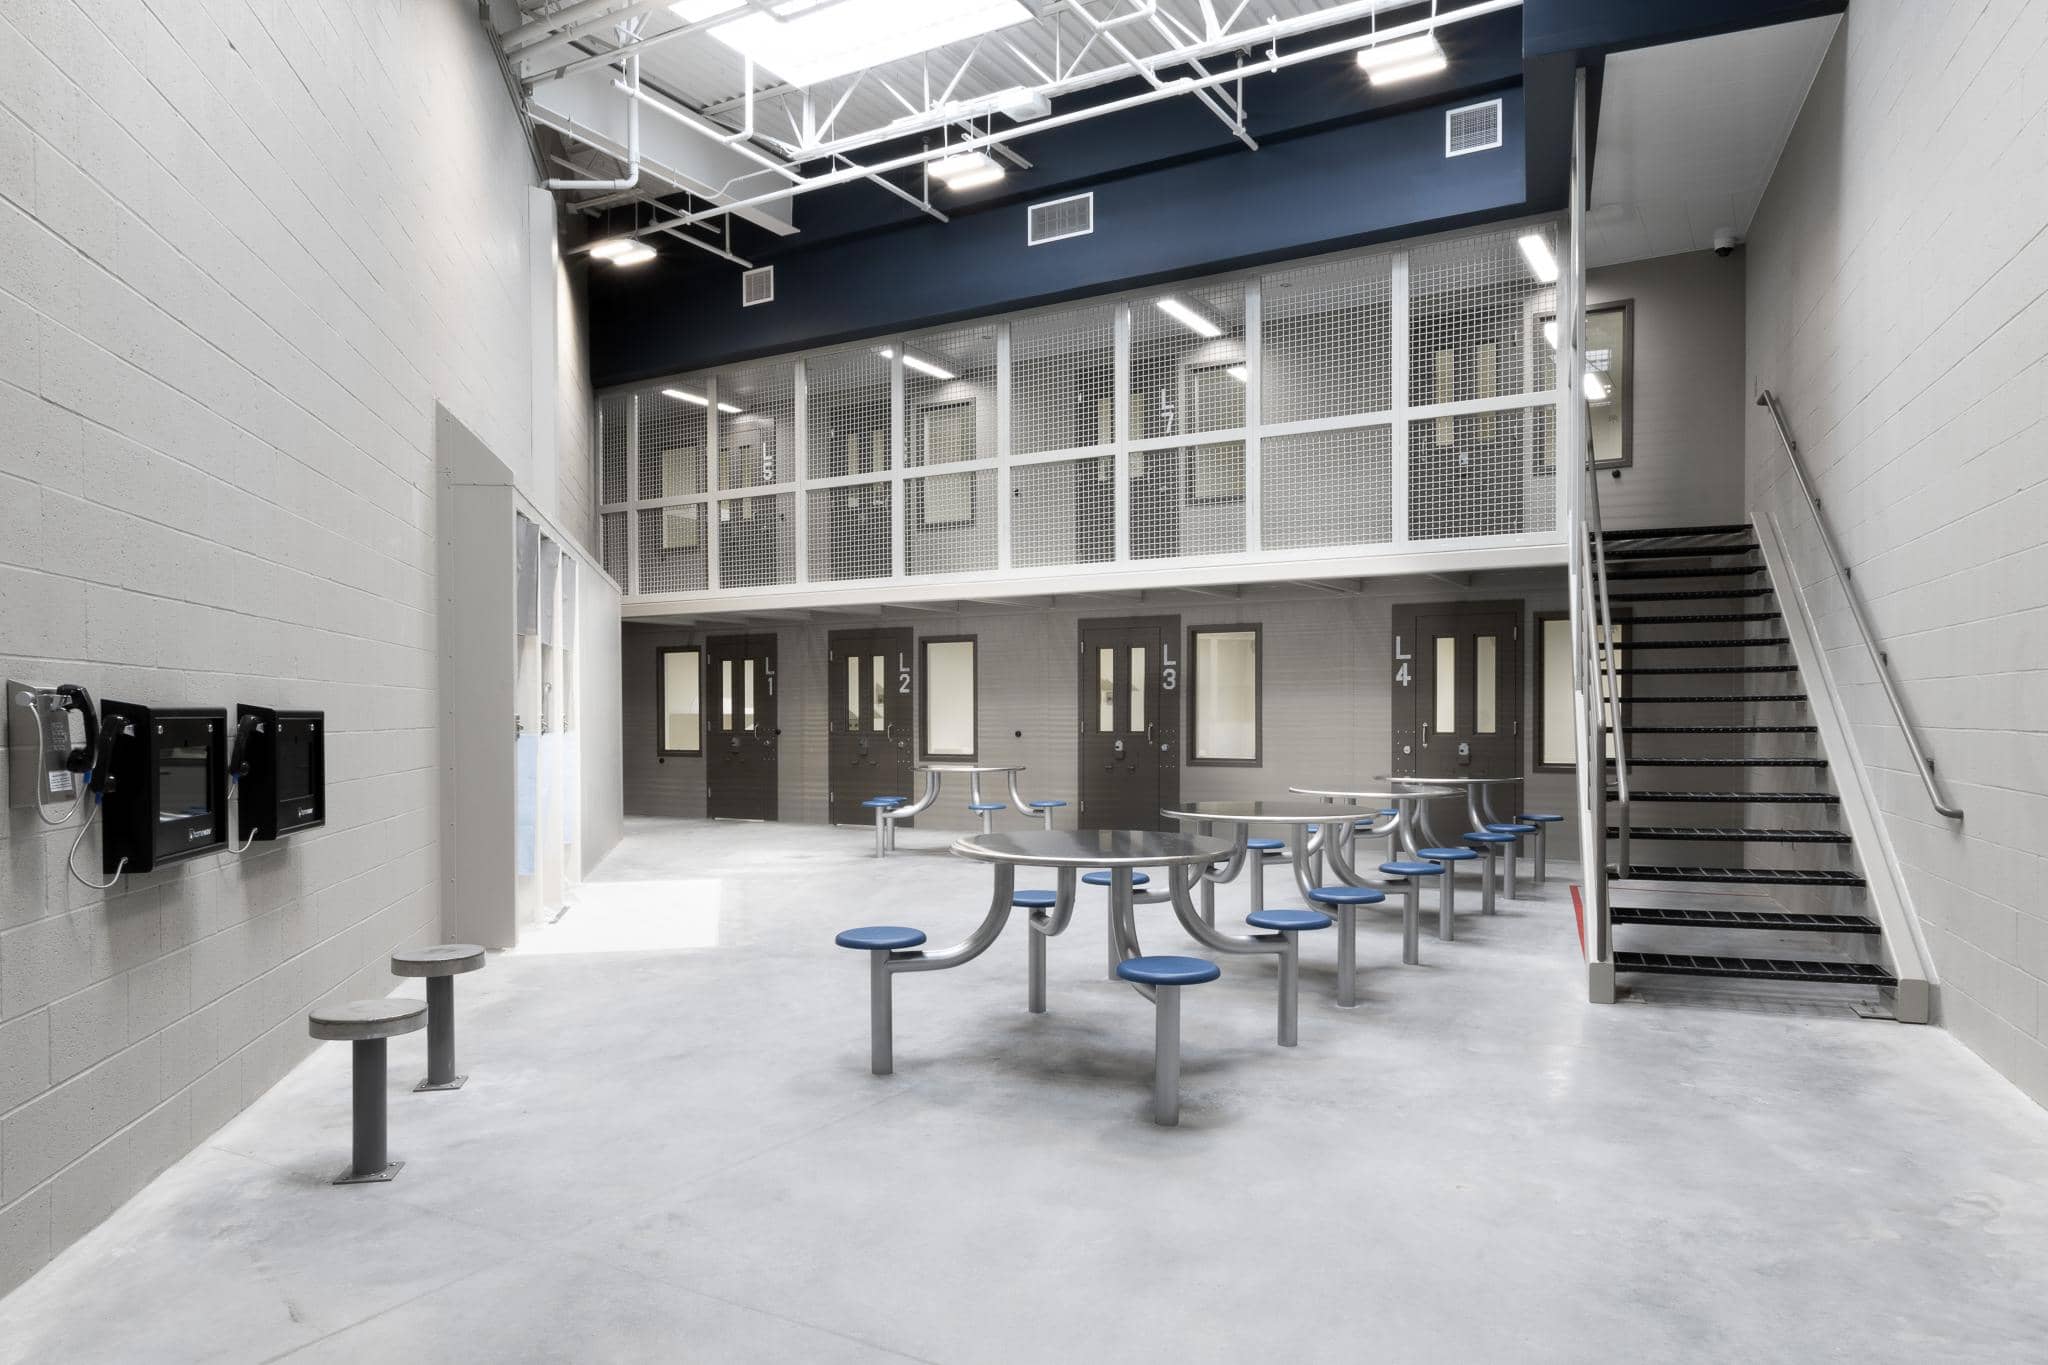 Image of Franklin County Adult Detention Center